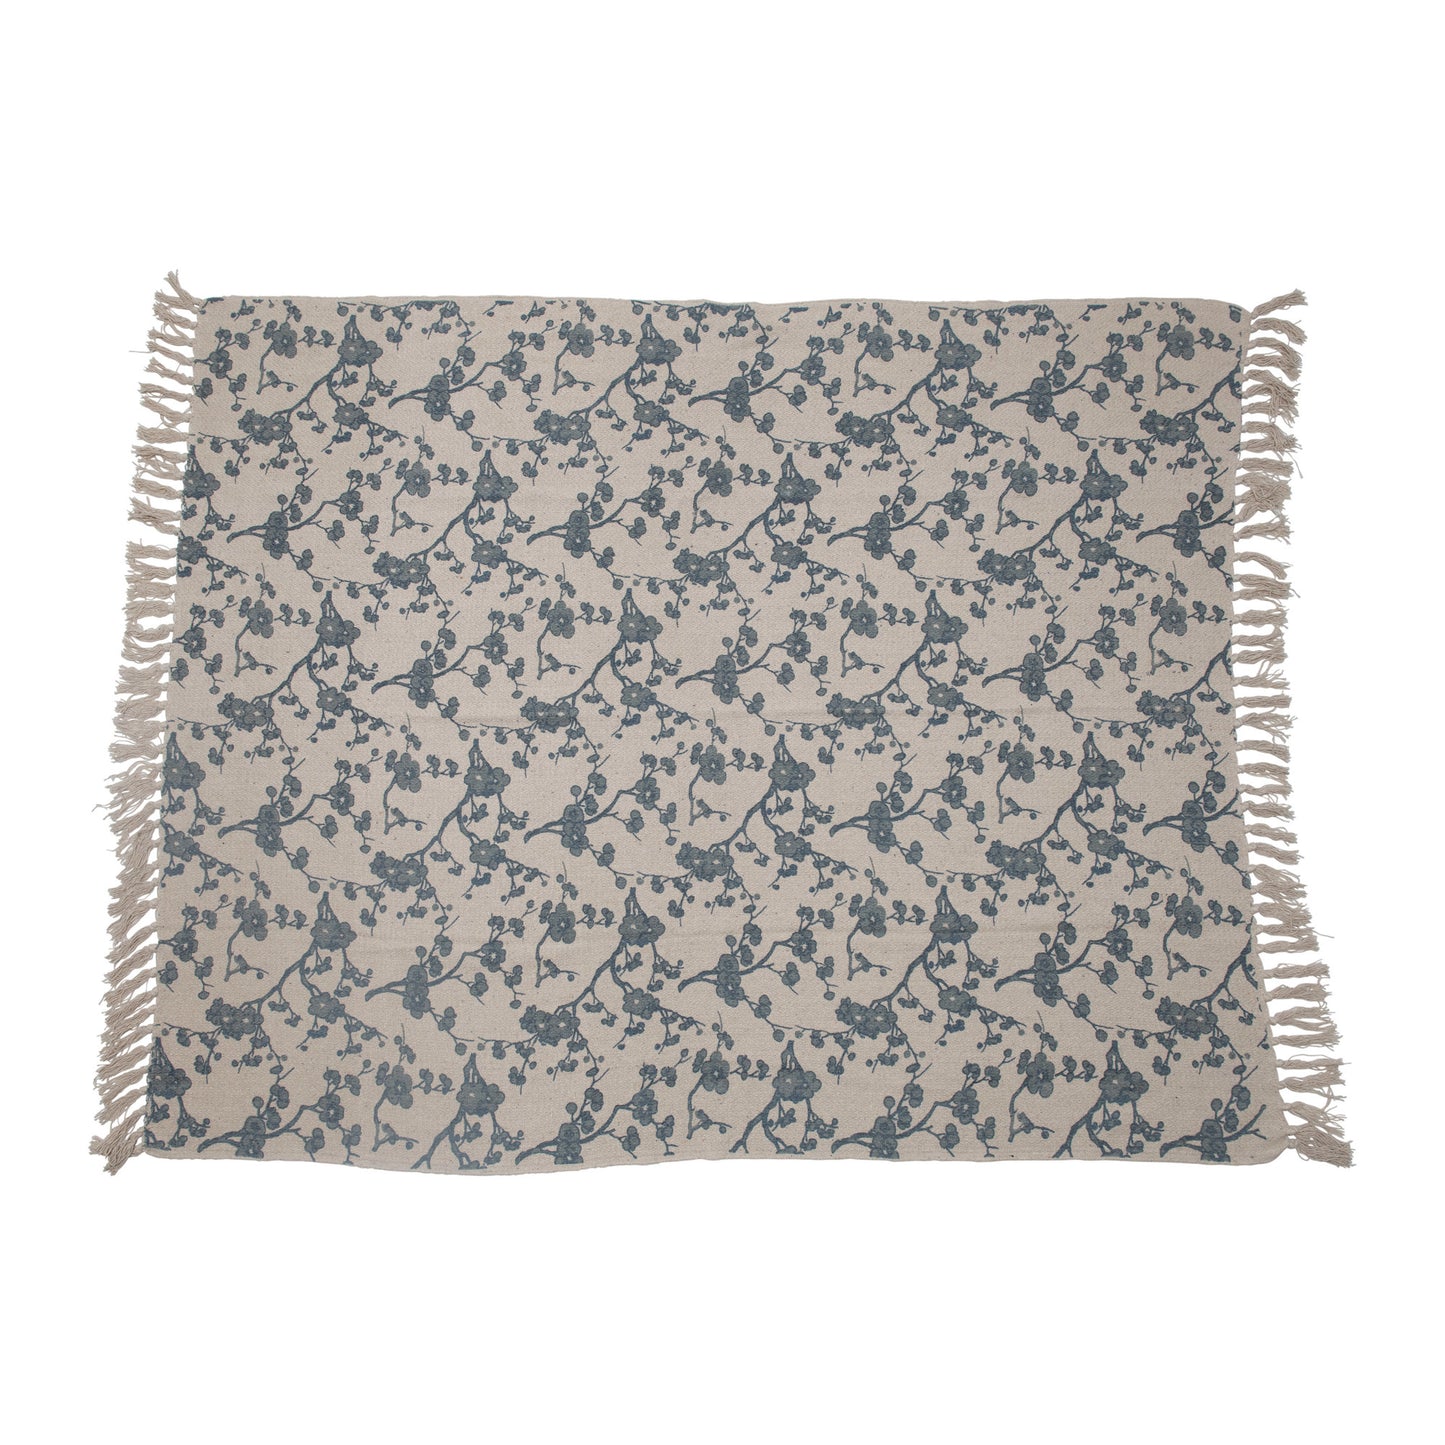 Piper Recycled Cotton Blend Printed Throw with Fringe